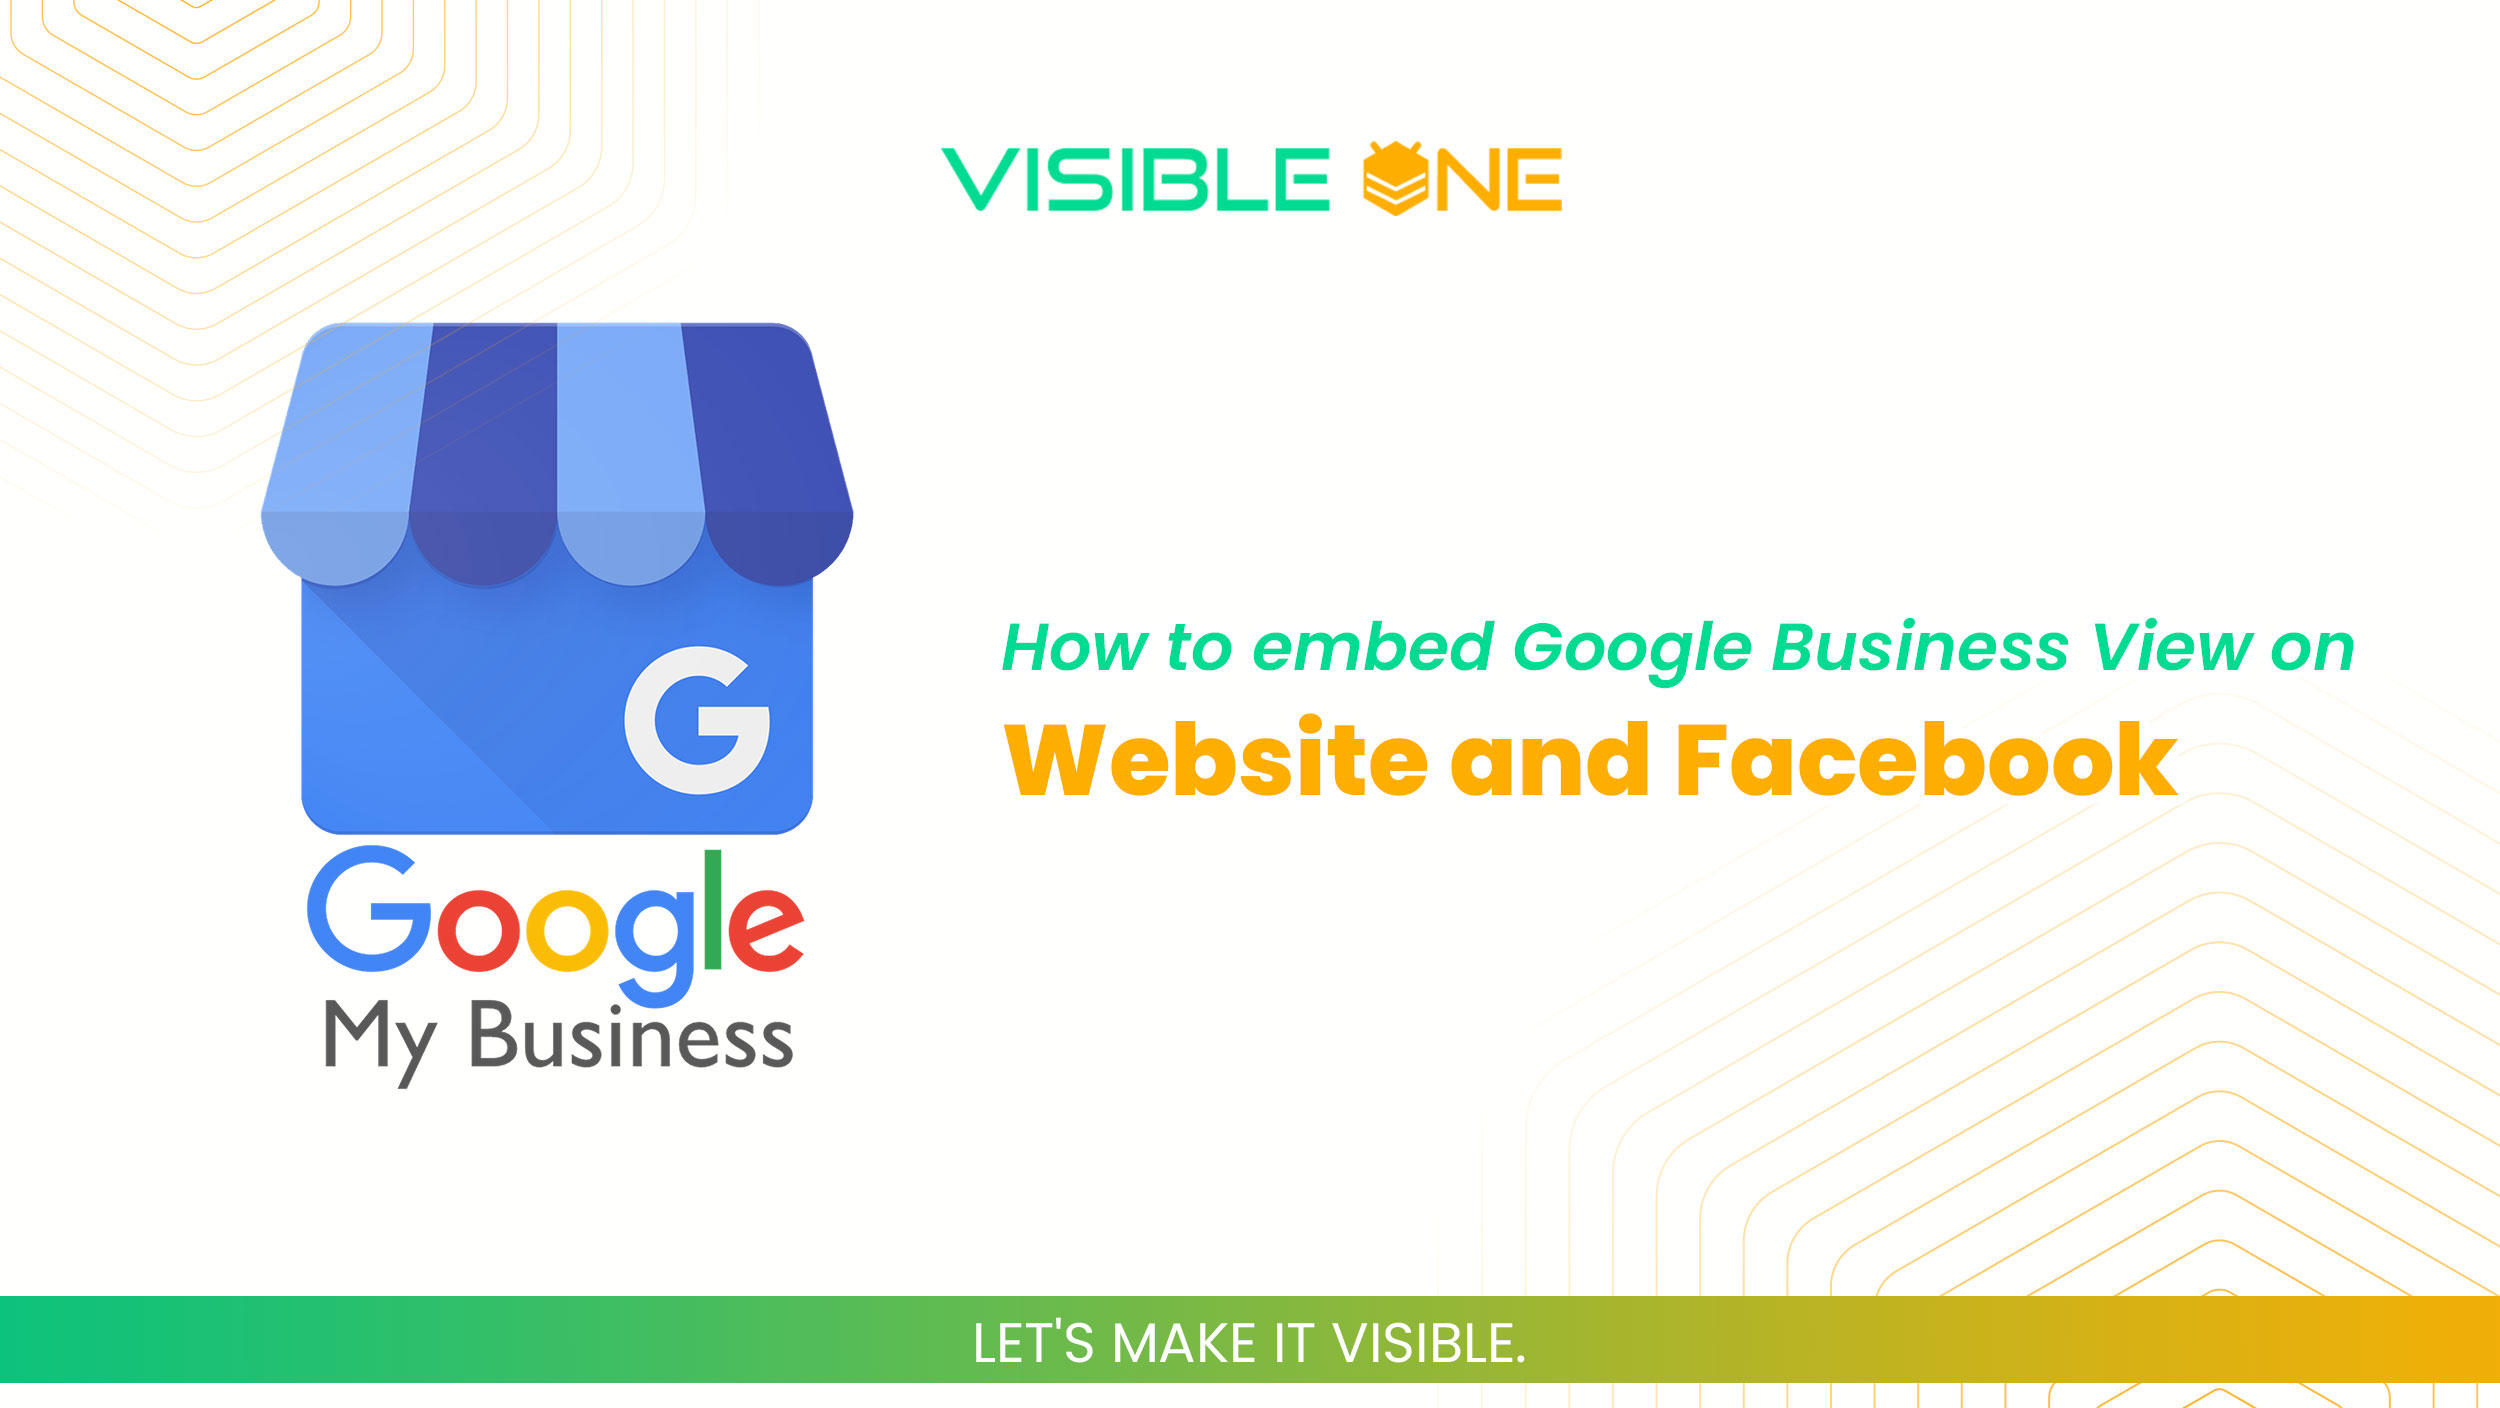 google my business logo, visible one